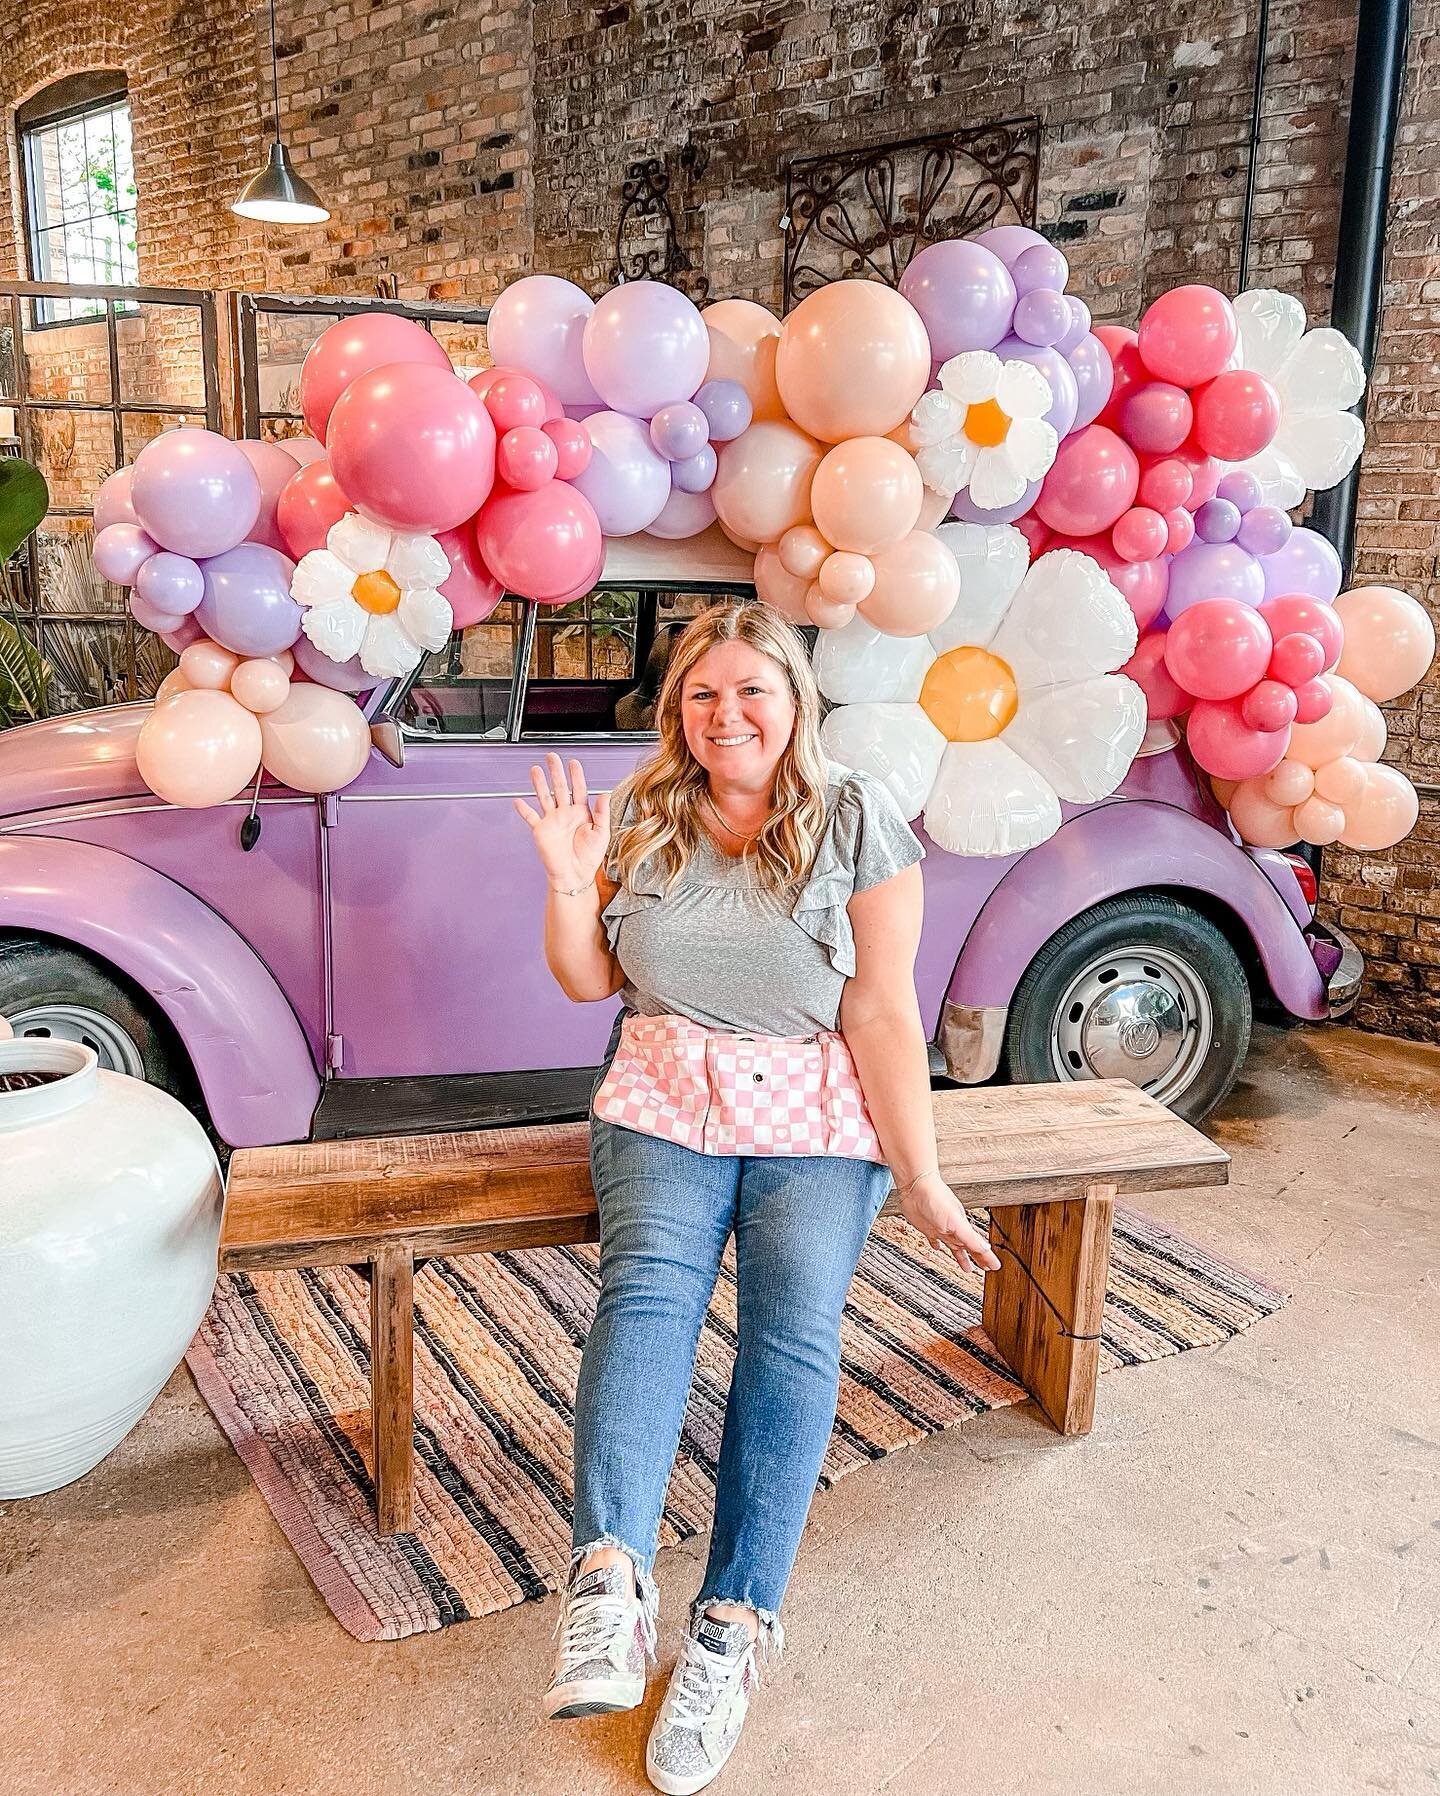 And just like that&hellip;..@tweepartees turned 3!!! Yesterday, actually✨ Not sure how we got here or where we&rsquo;re headed but one things for sure-give me all the Volkswagen Beetle&rsquo;s to decorate! 

Seriously though, I do know how we got her